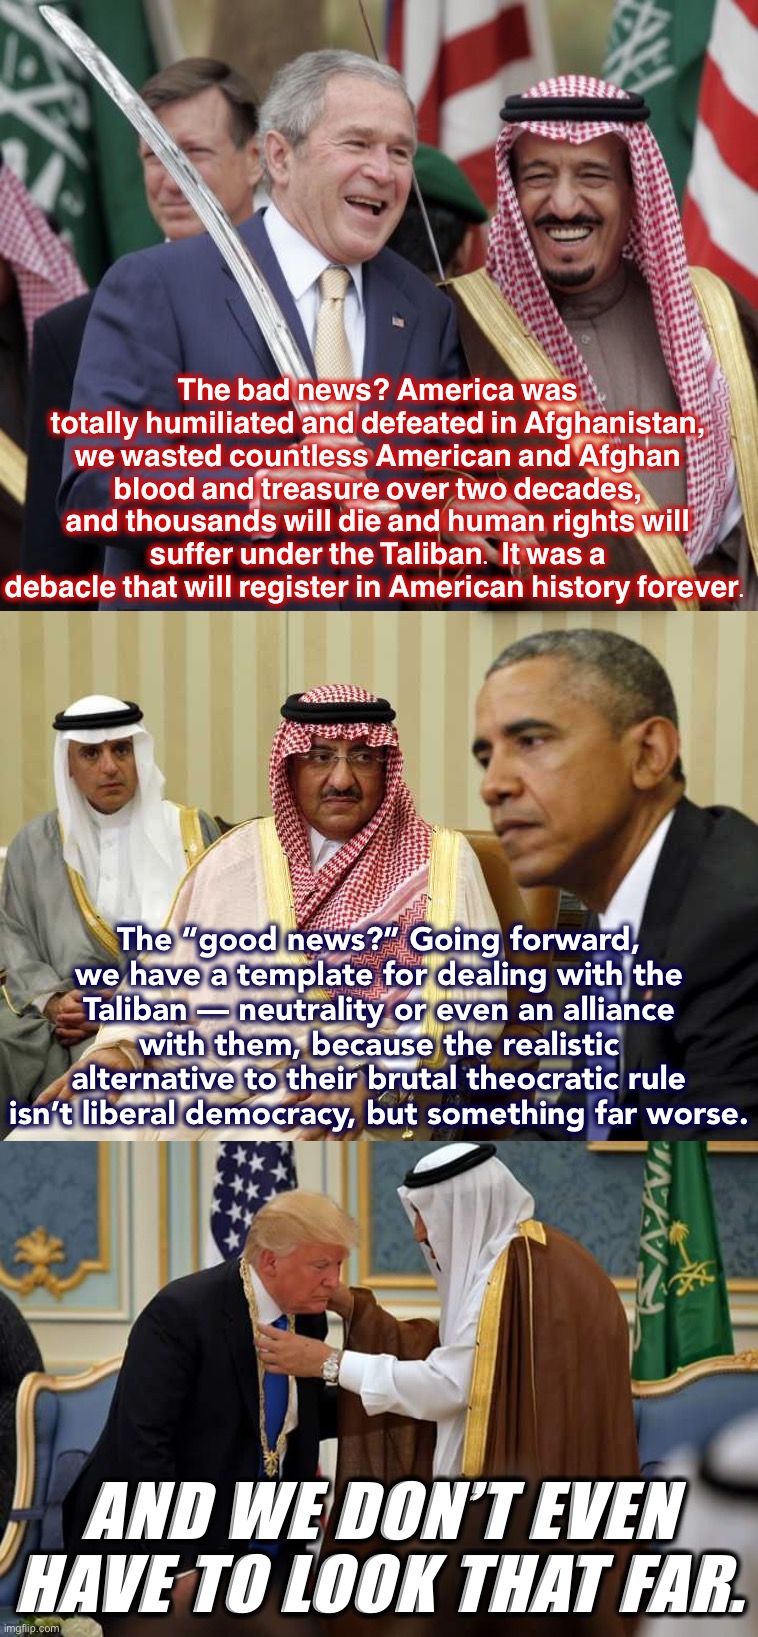 Wouldn’t it be strange if, after all this, we ended up allies with the Taliban? Well — have you considered Saudi Arabia? | The bad news? America was totally humiliated and defeated in Afghanistan, we wasted countless American and Afghan blood and treasure over two decades, and thousands will die and human rights will suffer under the Taliban. It was a debacle that will register in American history forever. The “good news?” Going forward, we have a template for dealing with the Taliban — neutrality or even an alliance with them, because the realistic alternative to their brutal theocratic rule isn’t liberal democracy, but something far worse. AND WE DON’T EVEN HAVE TO LOOK THAT FAR. | image tagged in saudi arabia,obama's saudi apology,trump saudi arabia,taliban,afghanistan,middle east | made w/ Imgflip meme maker